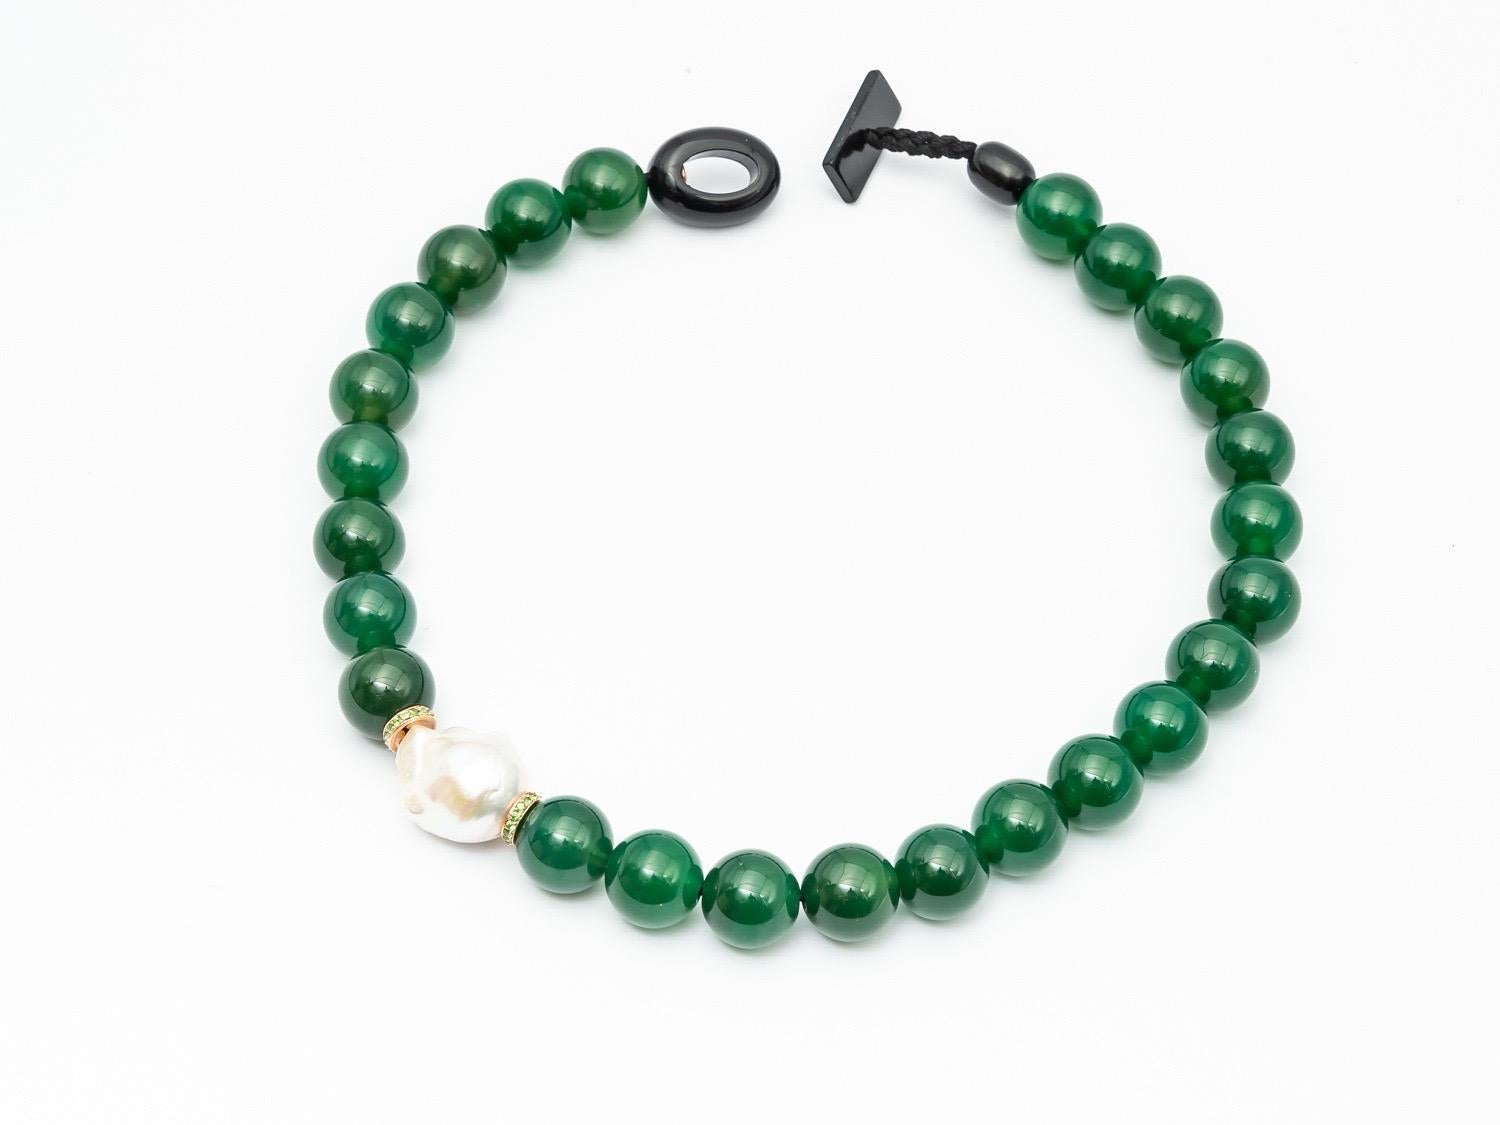 Green Agate Beads Necklace Accompanied by Baroque Pearl and 0.32 Ct of Tsavorite 1